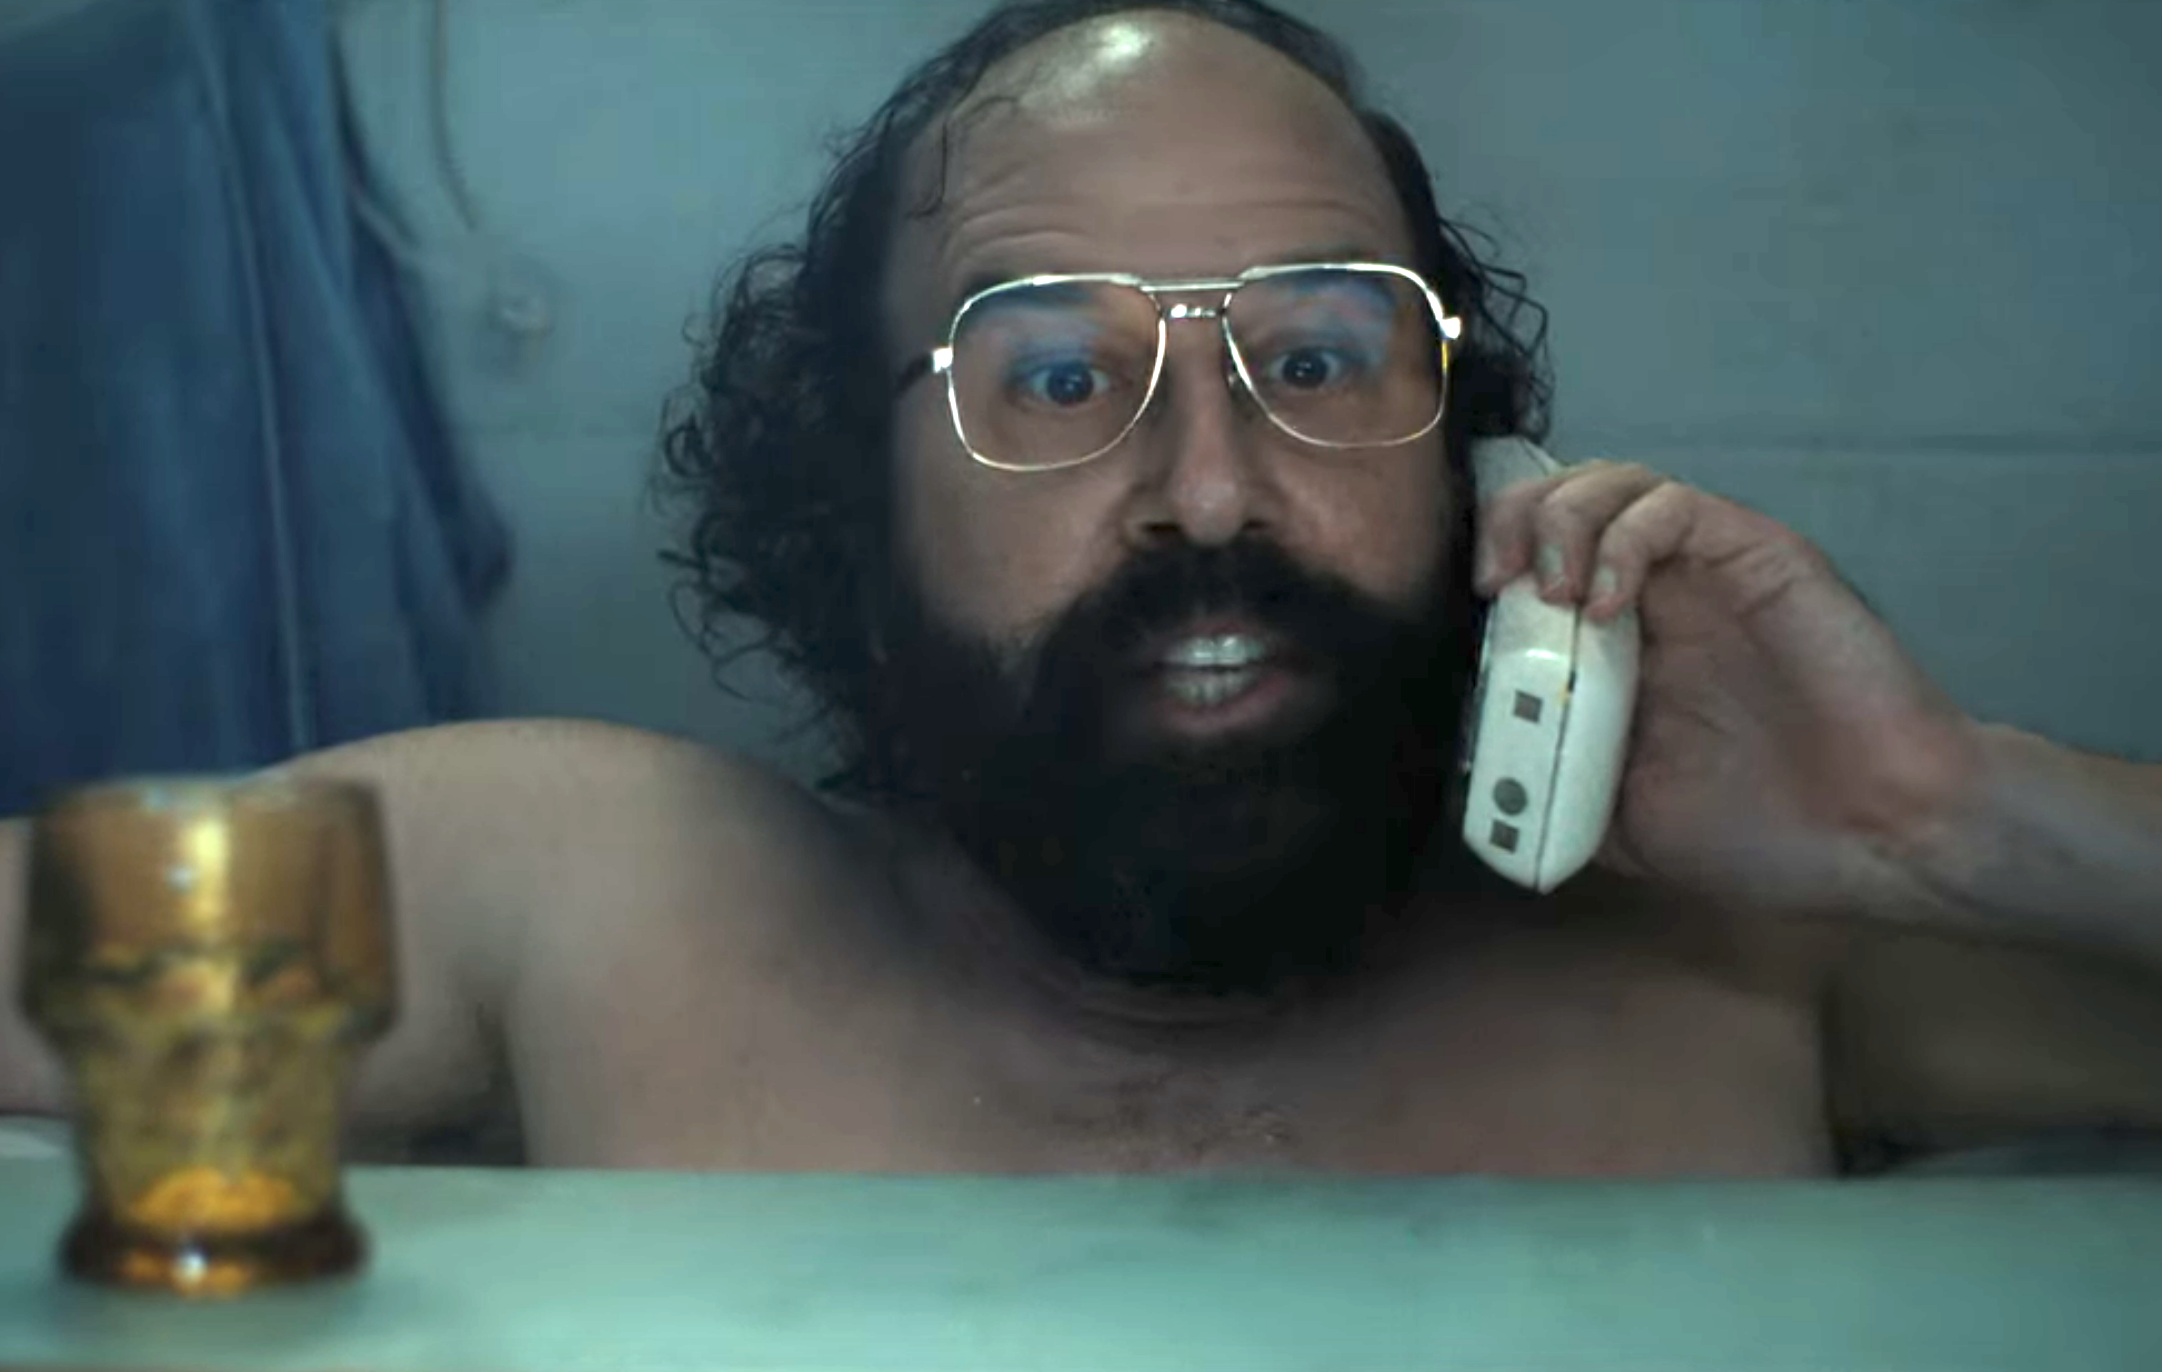 murray on the phone in the tub